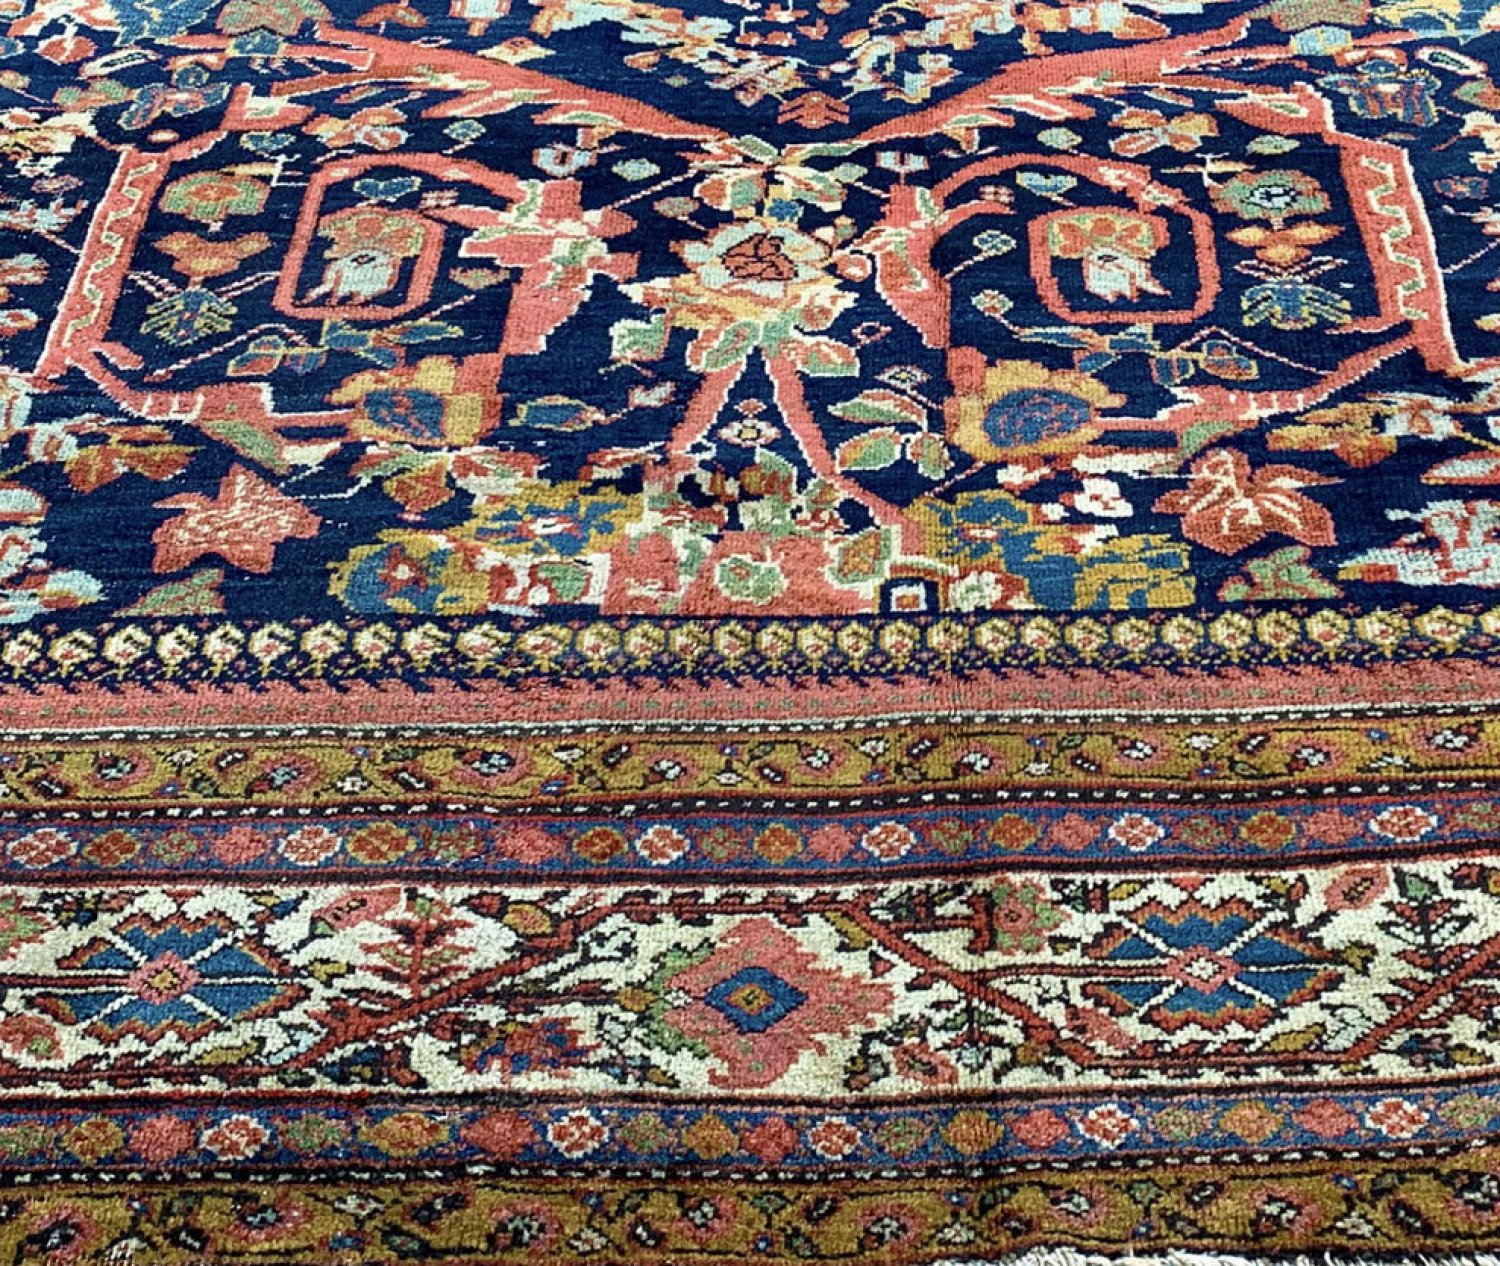 Feraghan carpet from western Persia